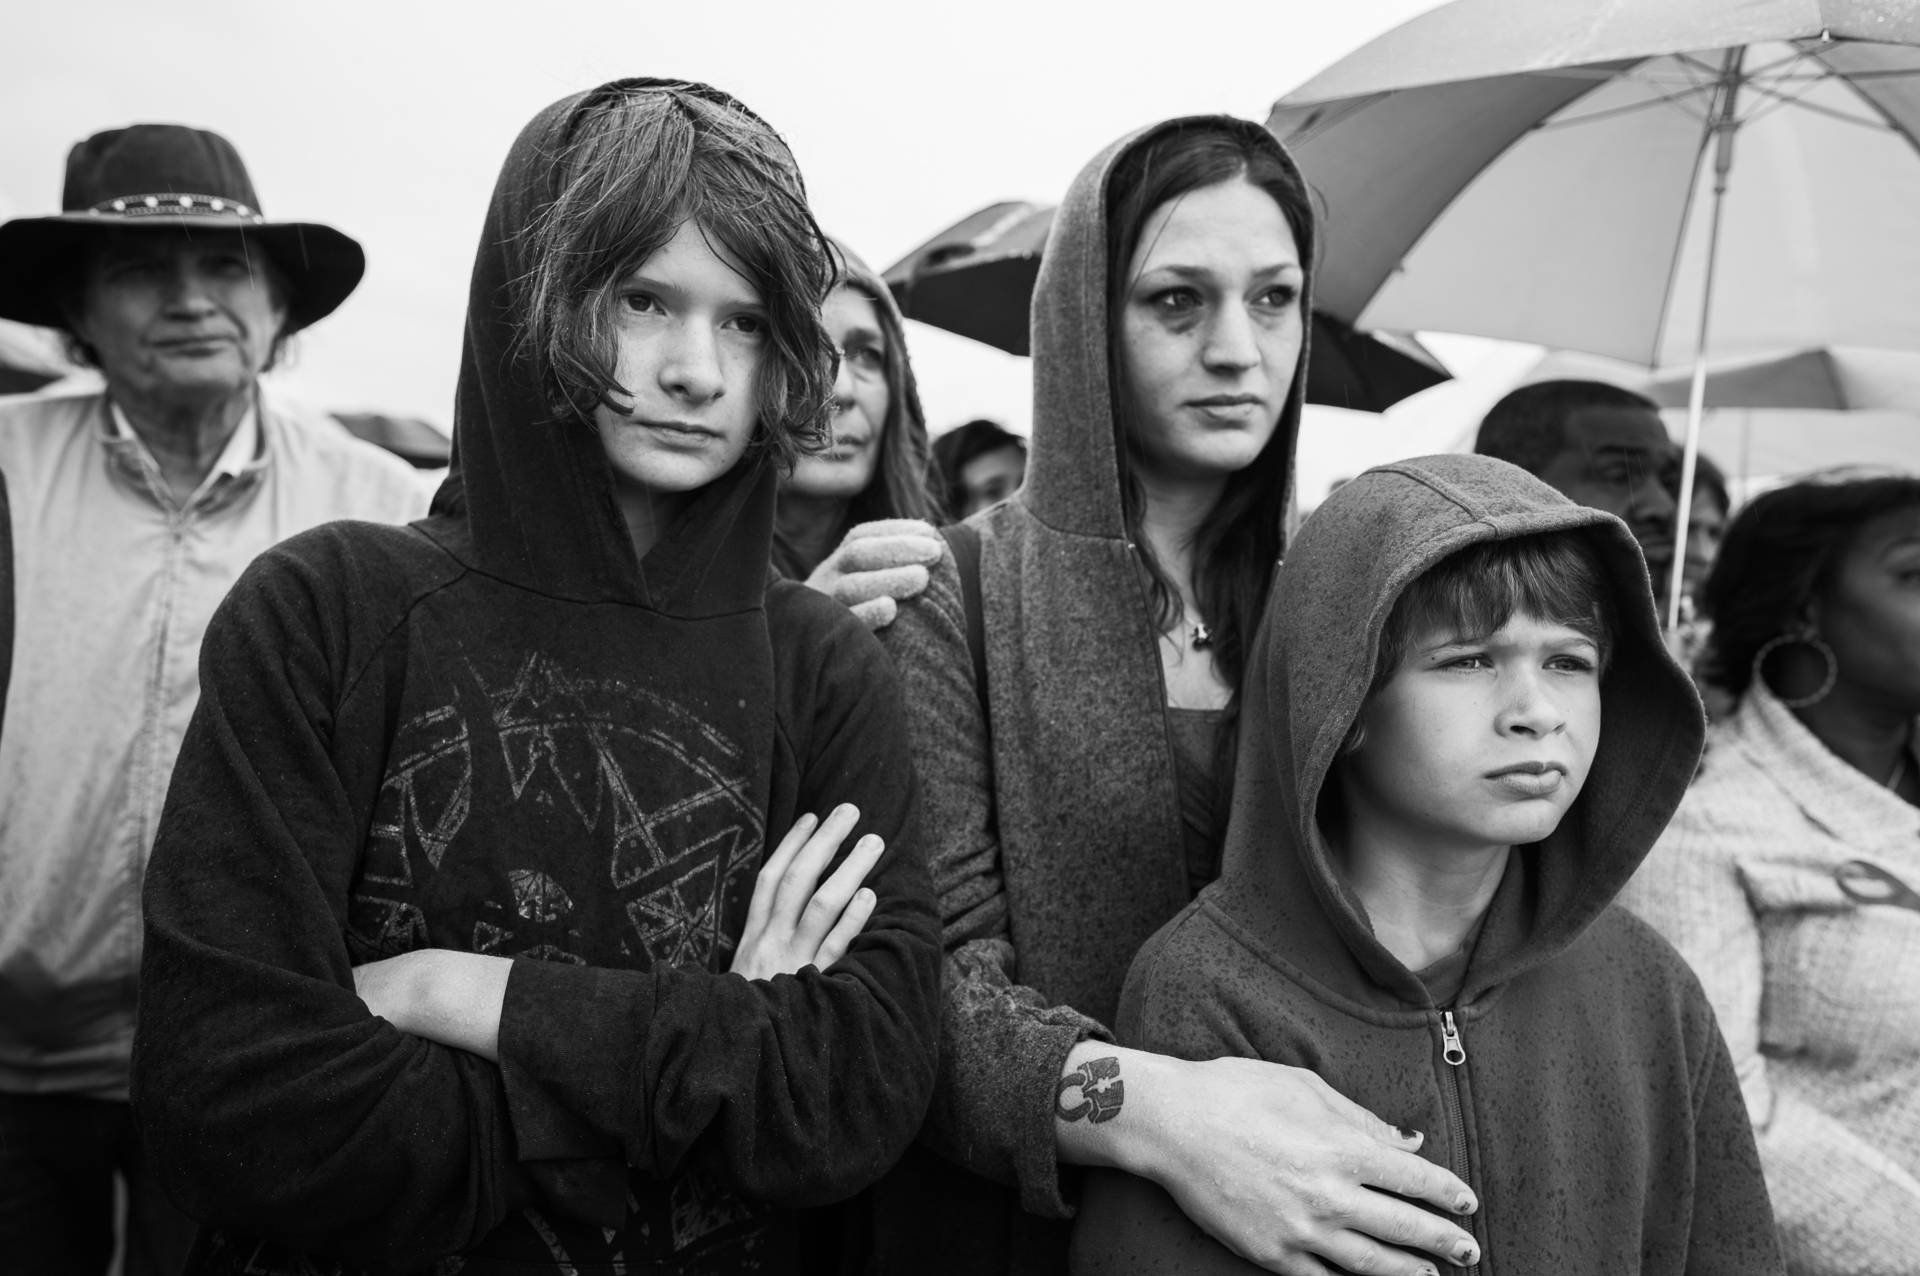 For The First Time, Unbeatable Sarah And Her Two Sons Stood Publicly With Other Victims Of Domestic Violence At "Meet Us At The Bridge," Nashville, Tennessee